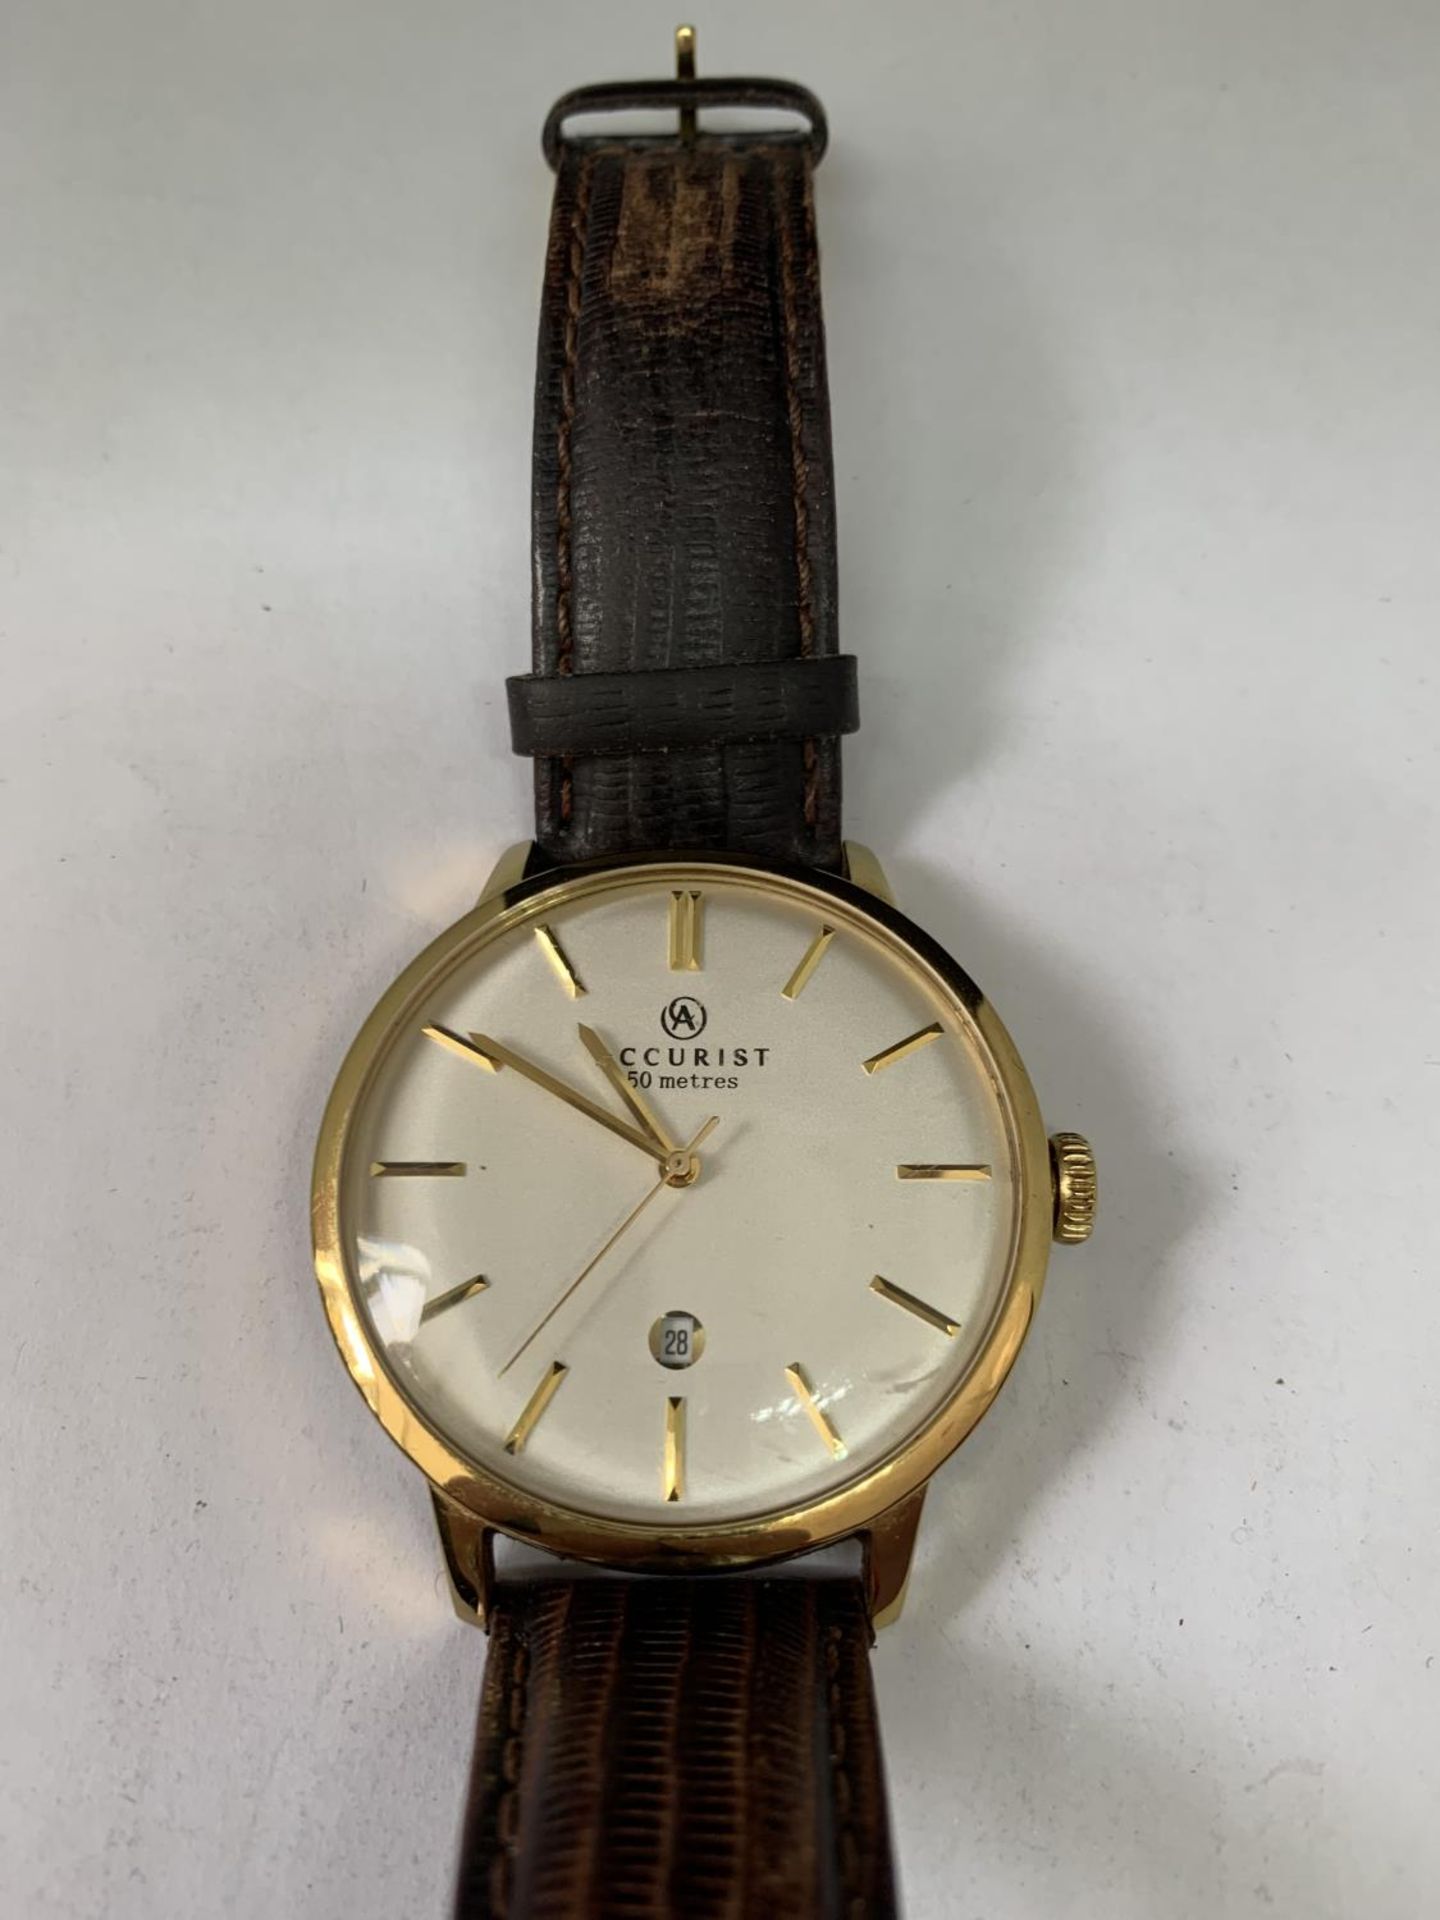 AN ACCURIST WRIST WATCH SEEN WORKING BUT NO WARRANTY - Image 2 of 3